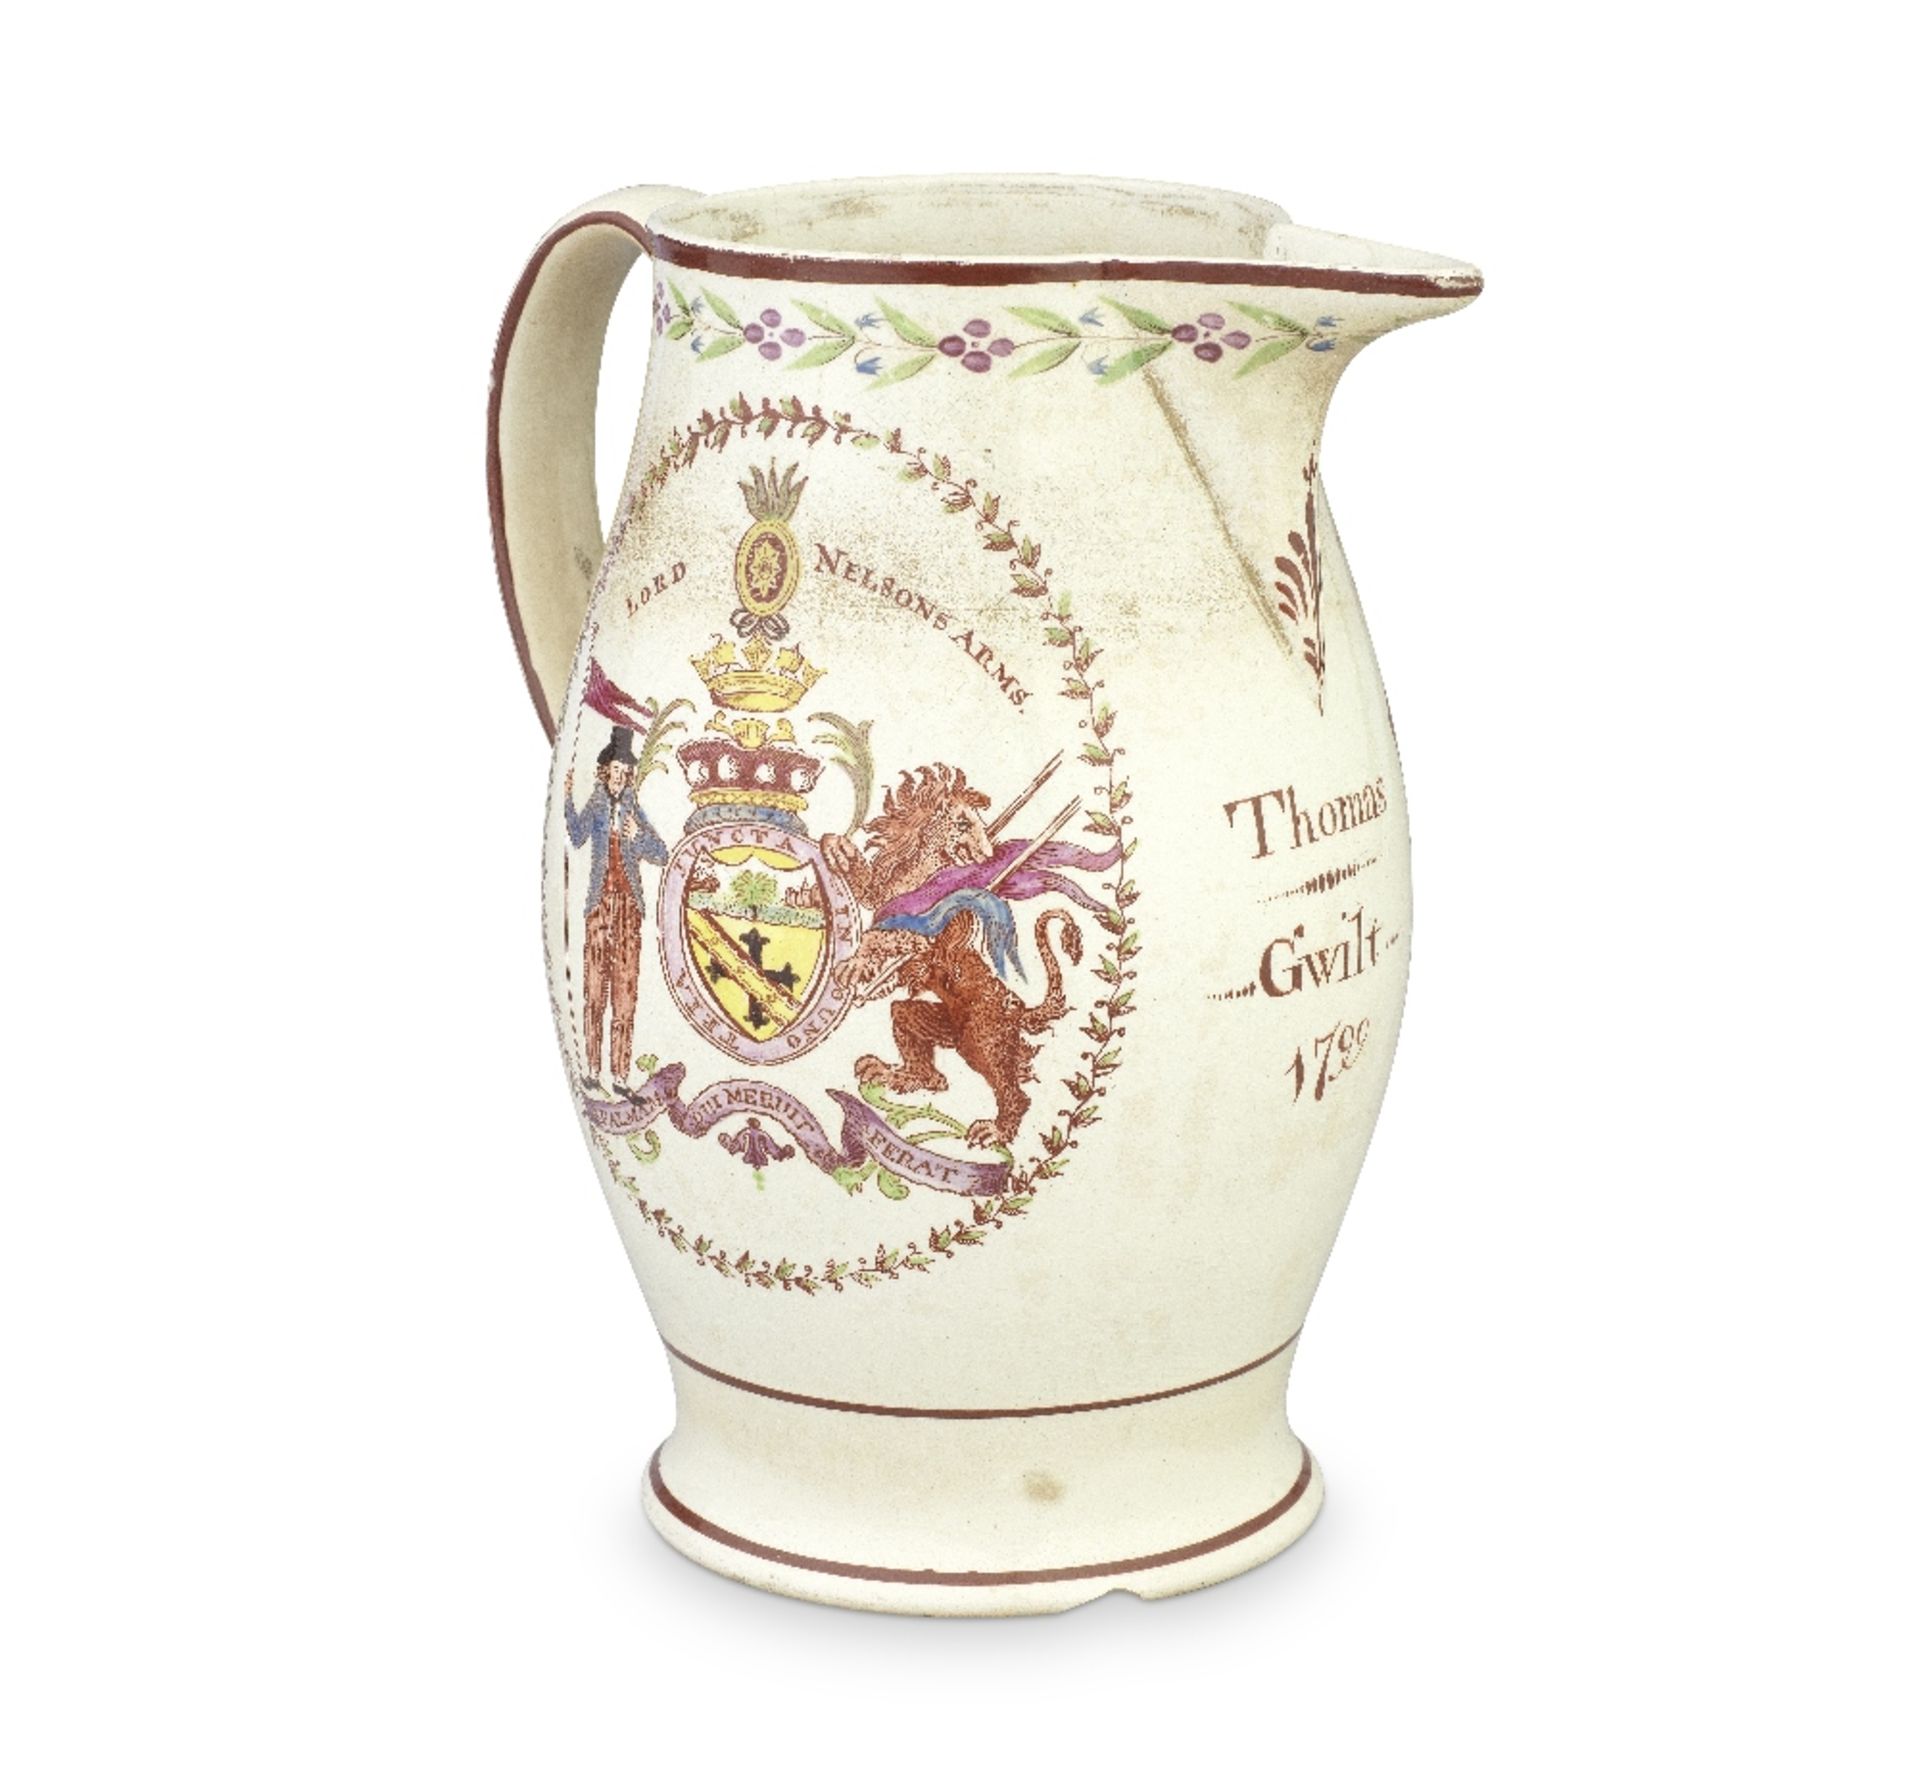 A creamware jug, inscribed and dated 1799